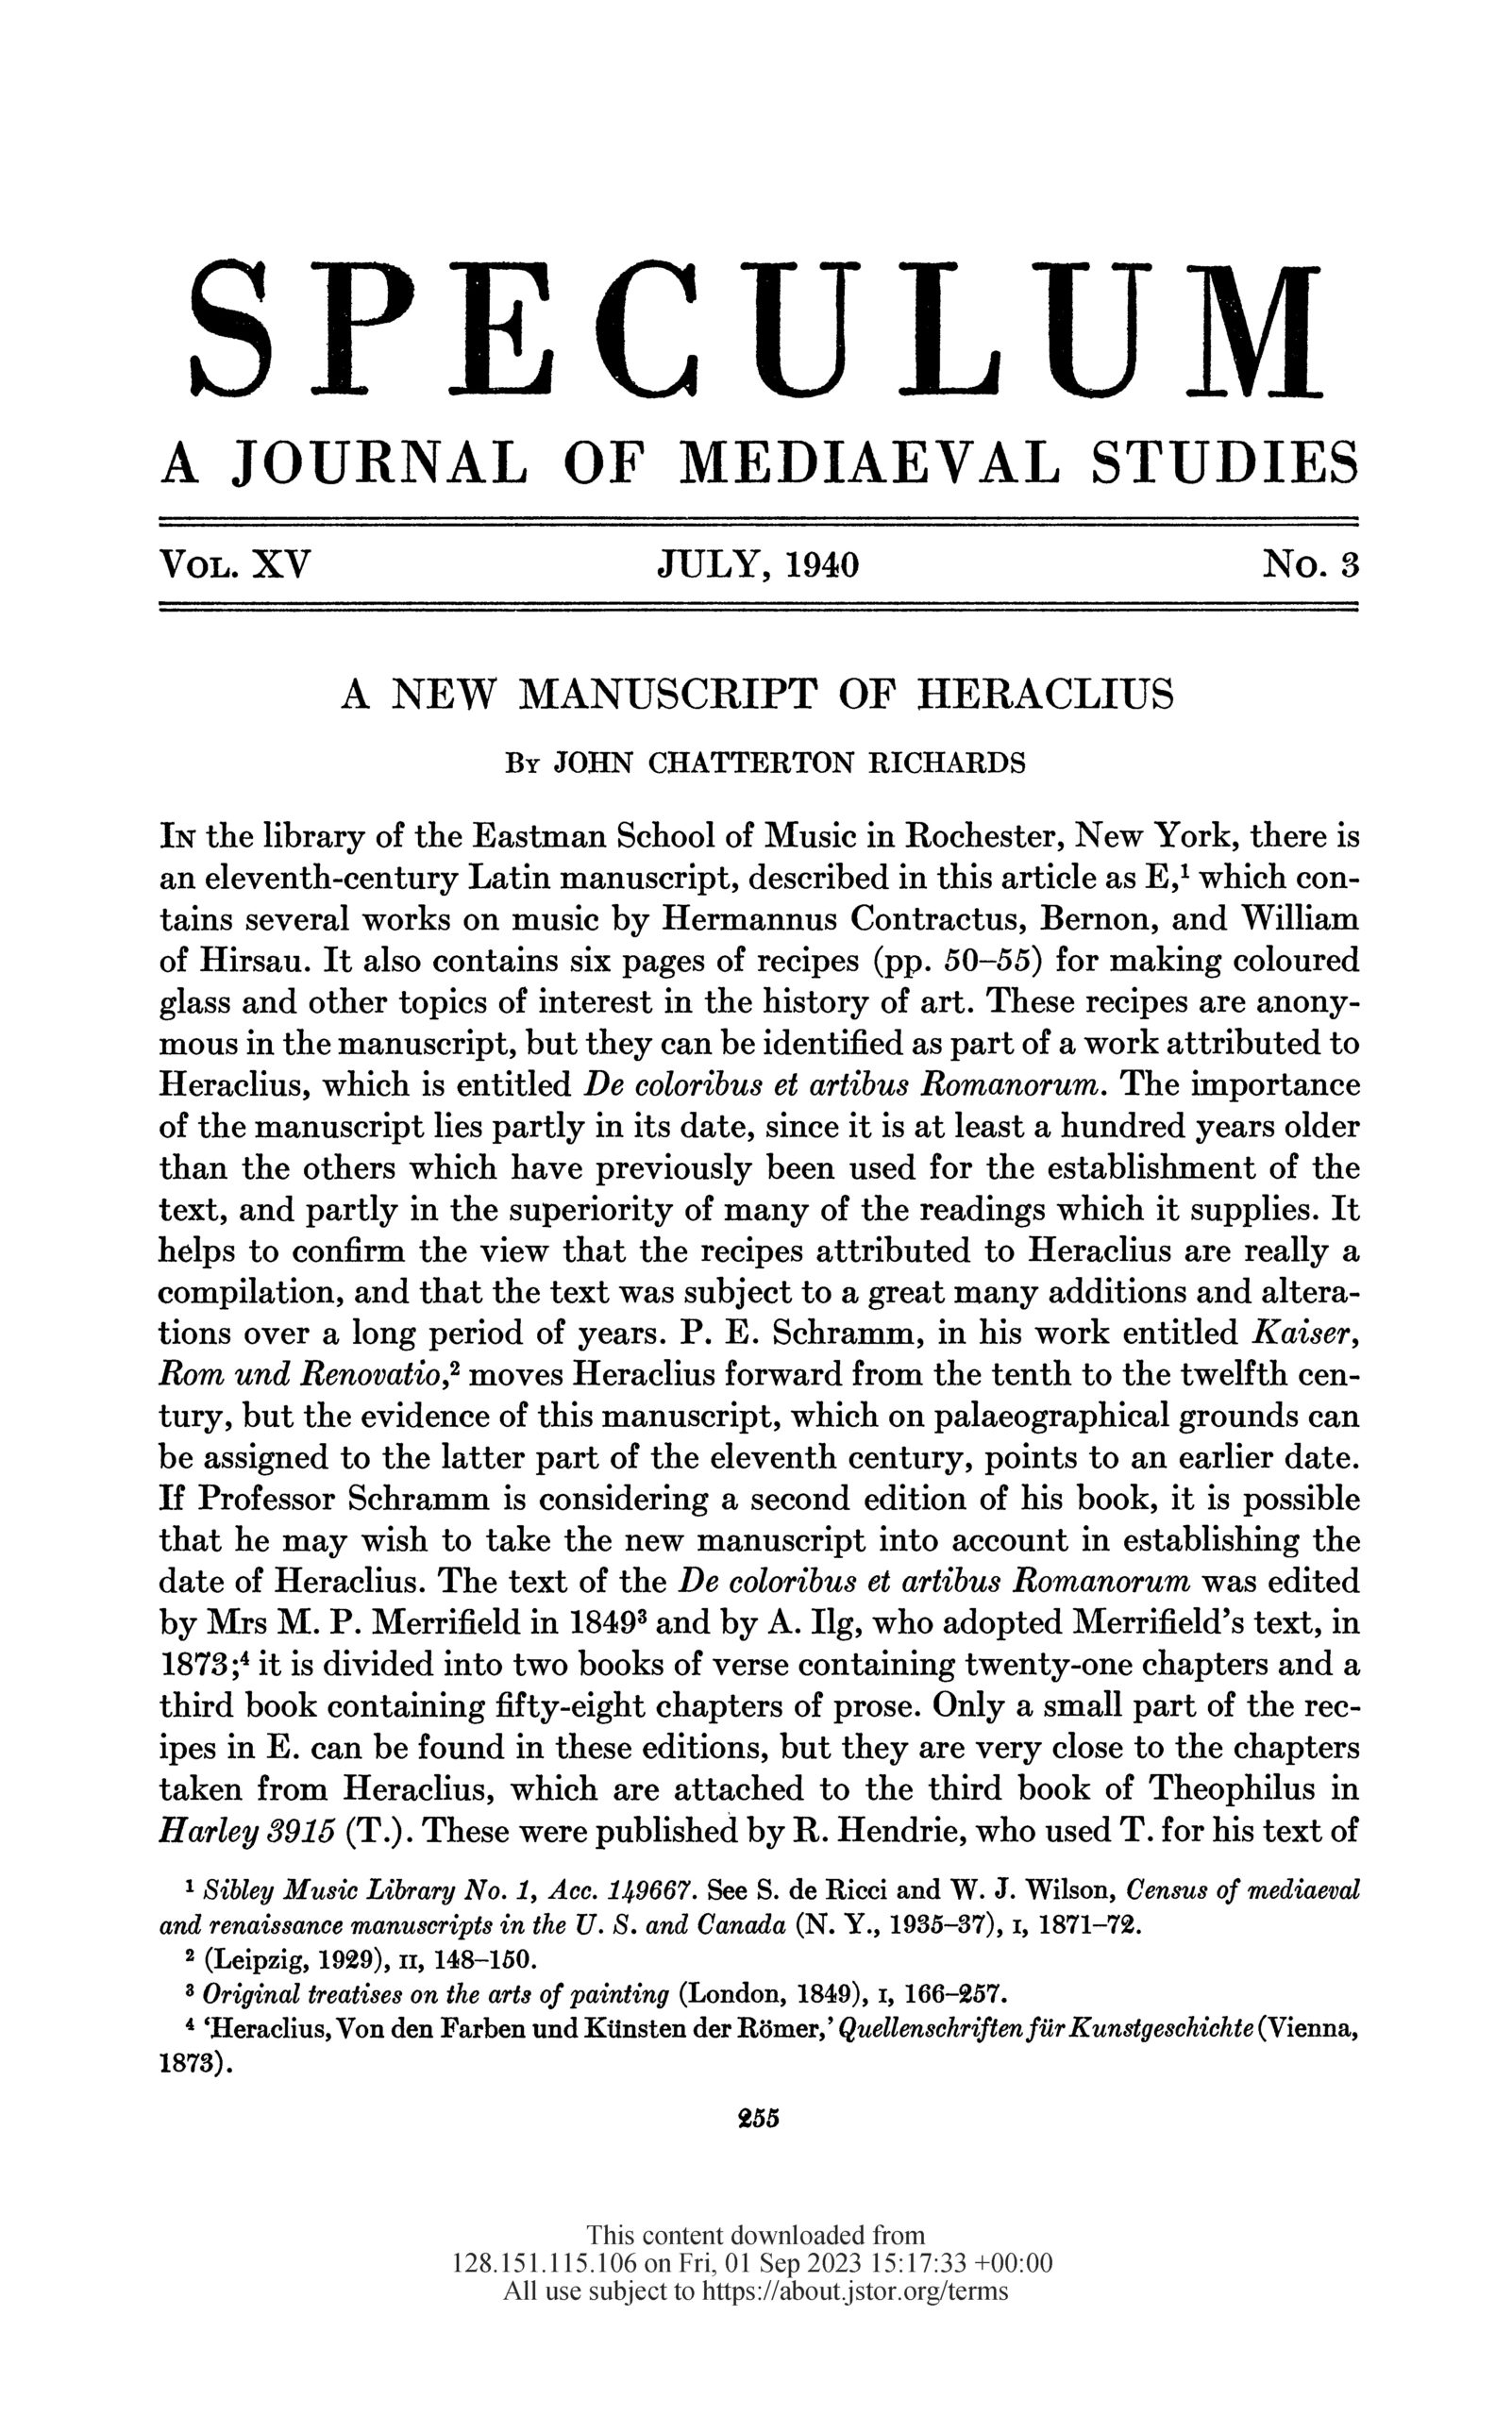 Richards, A New Manuscript of Heraclius (page 255)